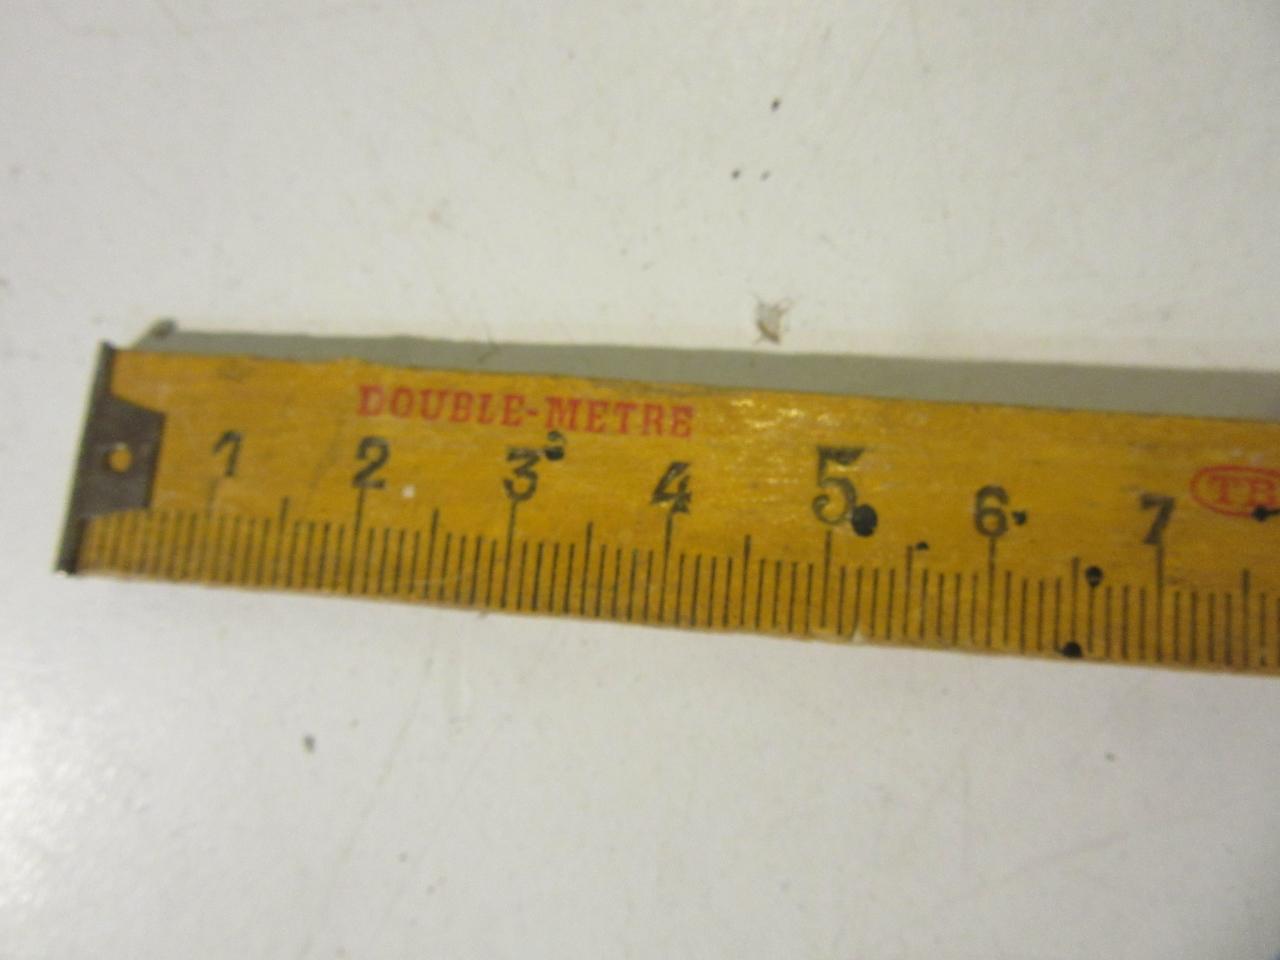 Lot of 3 Folding Extension Rulers, Incl.: Lufkin